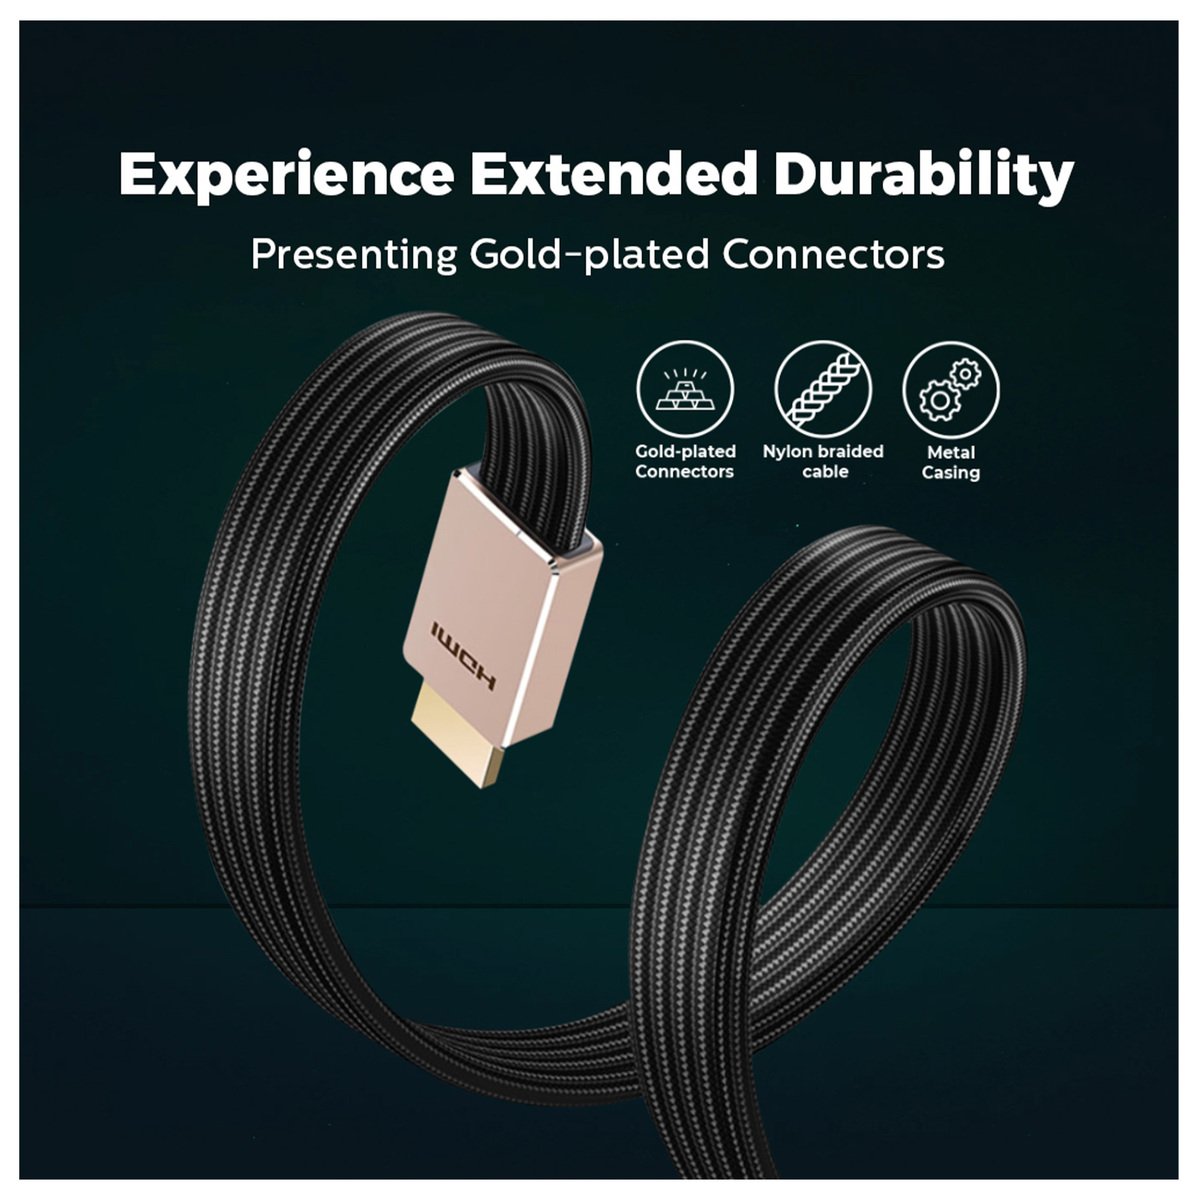 Philips HDMI 2.1 Cable 8K, 3m -SWV9030/10